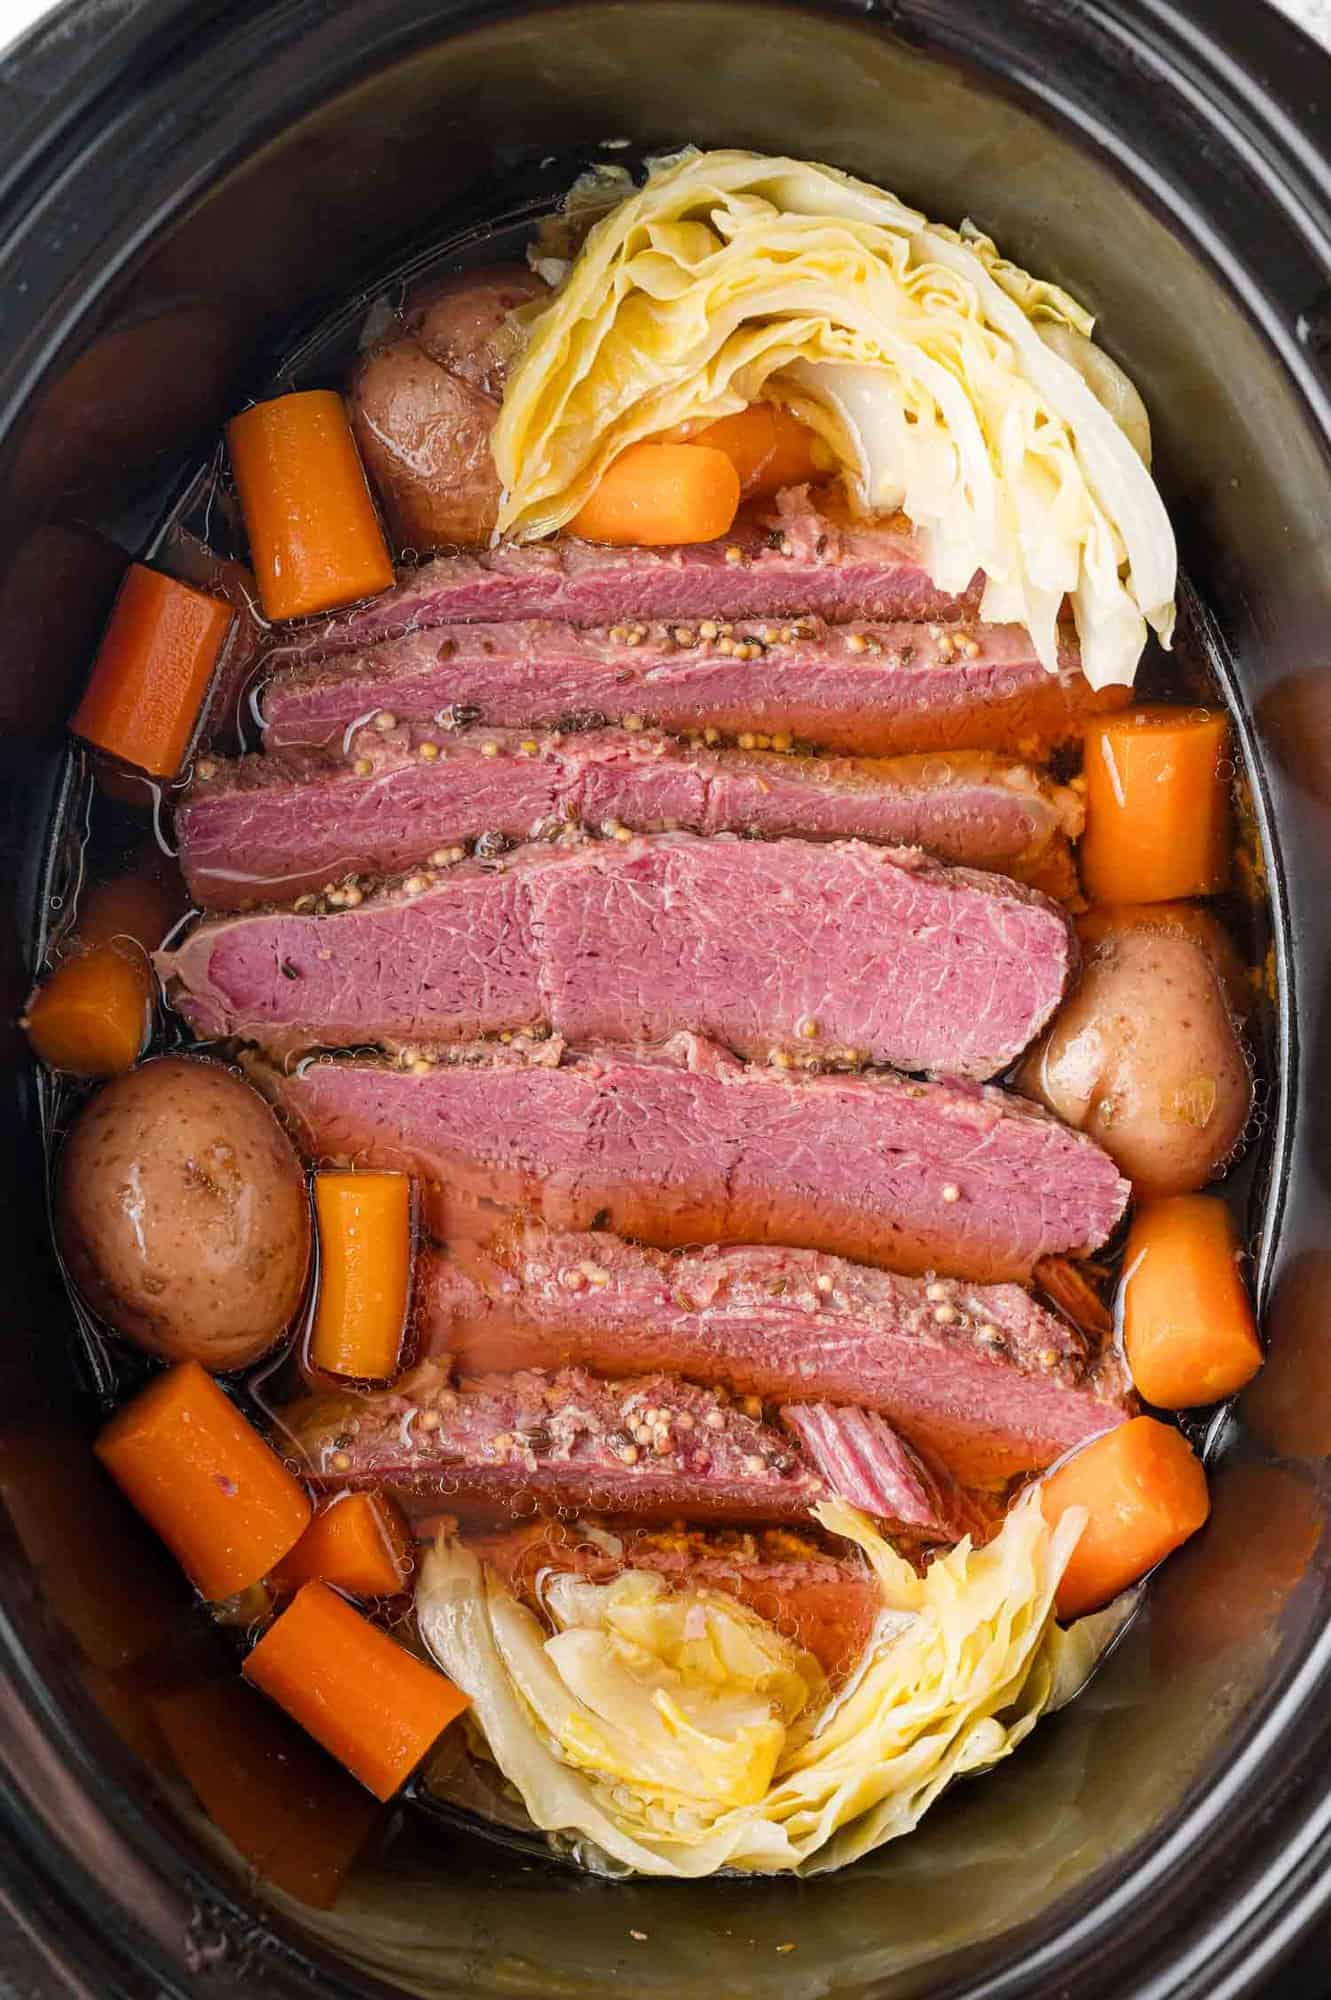 Corned beef in a crockpot with cabbage, potatoes, carrots.